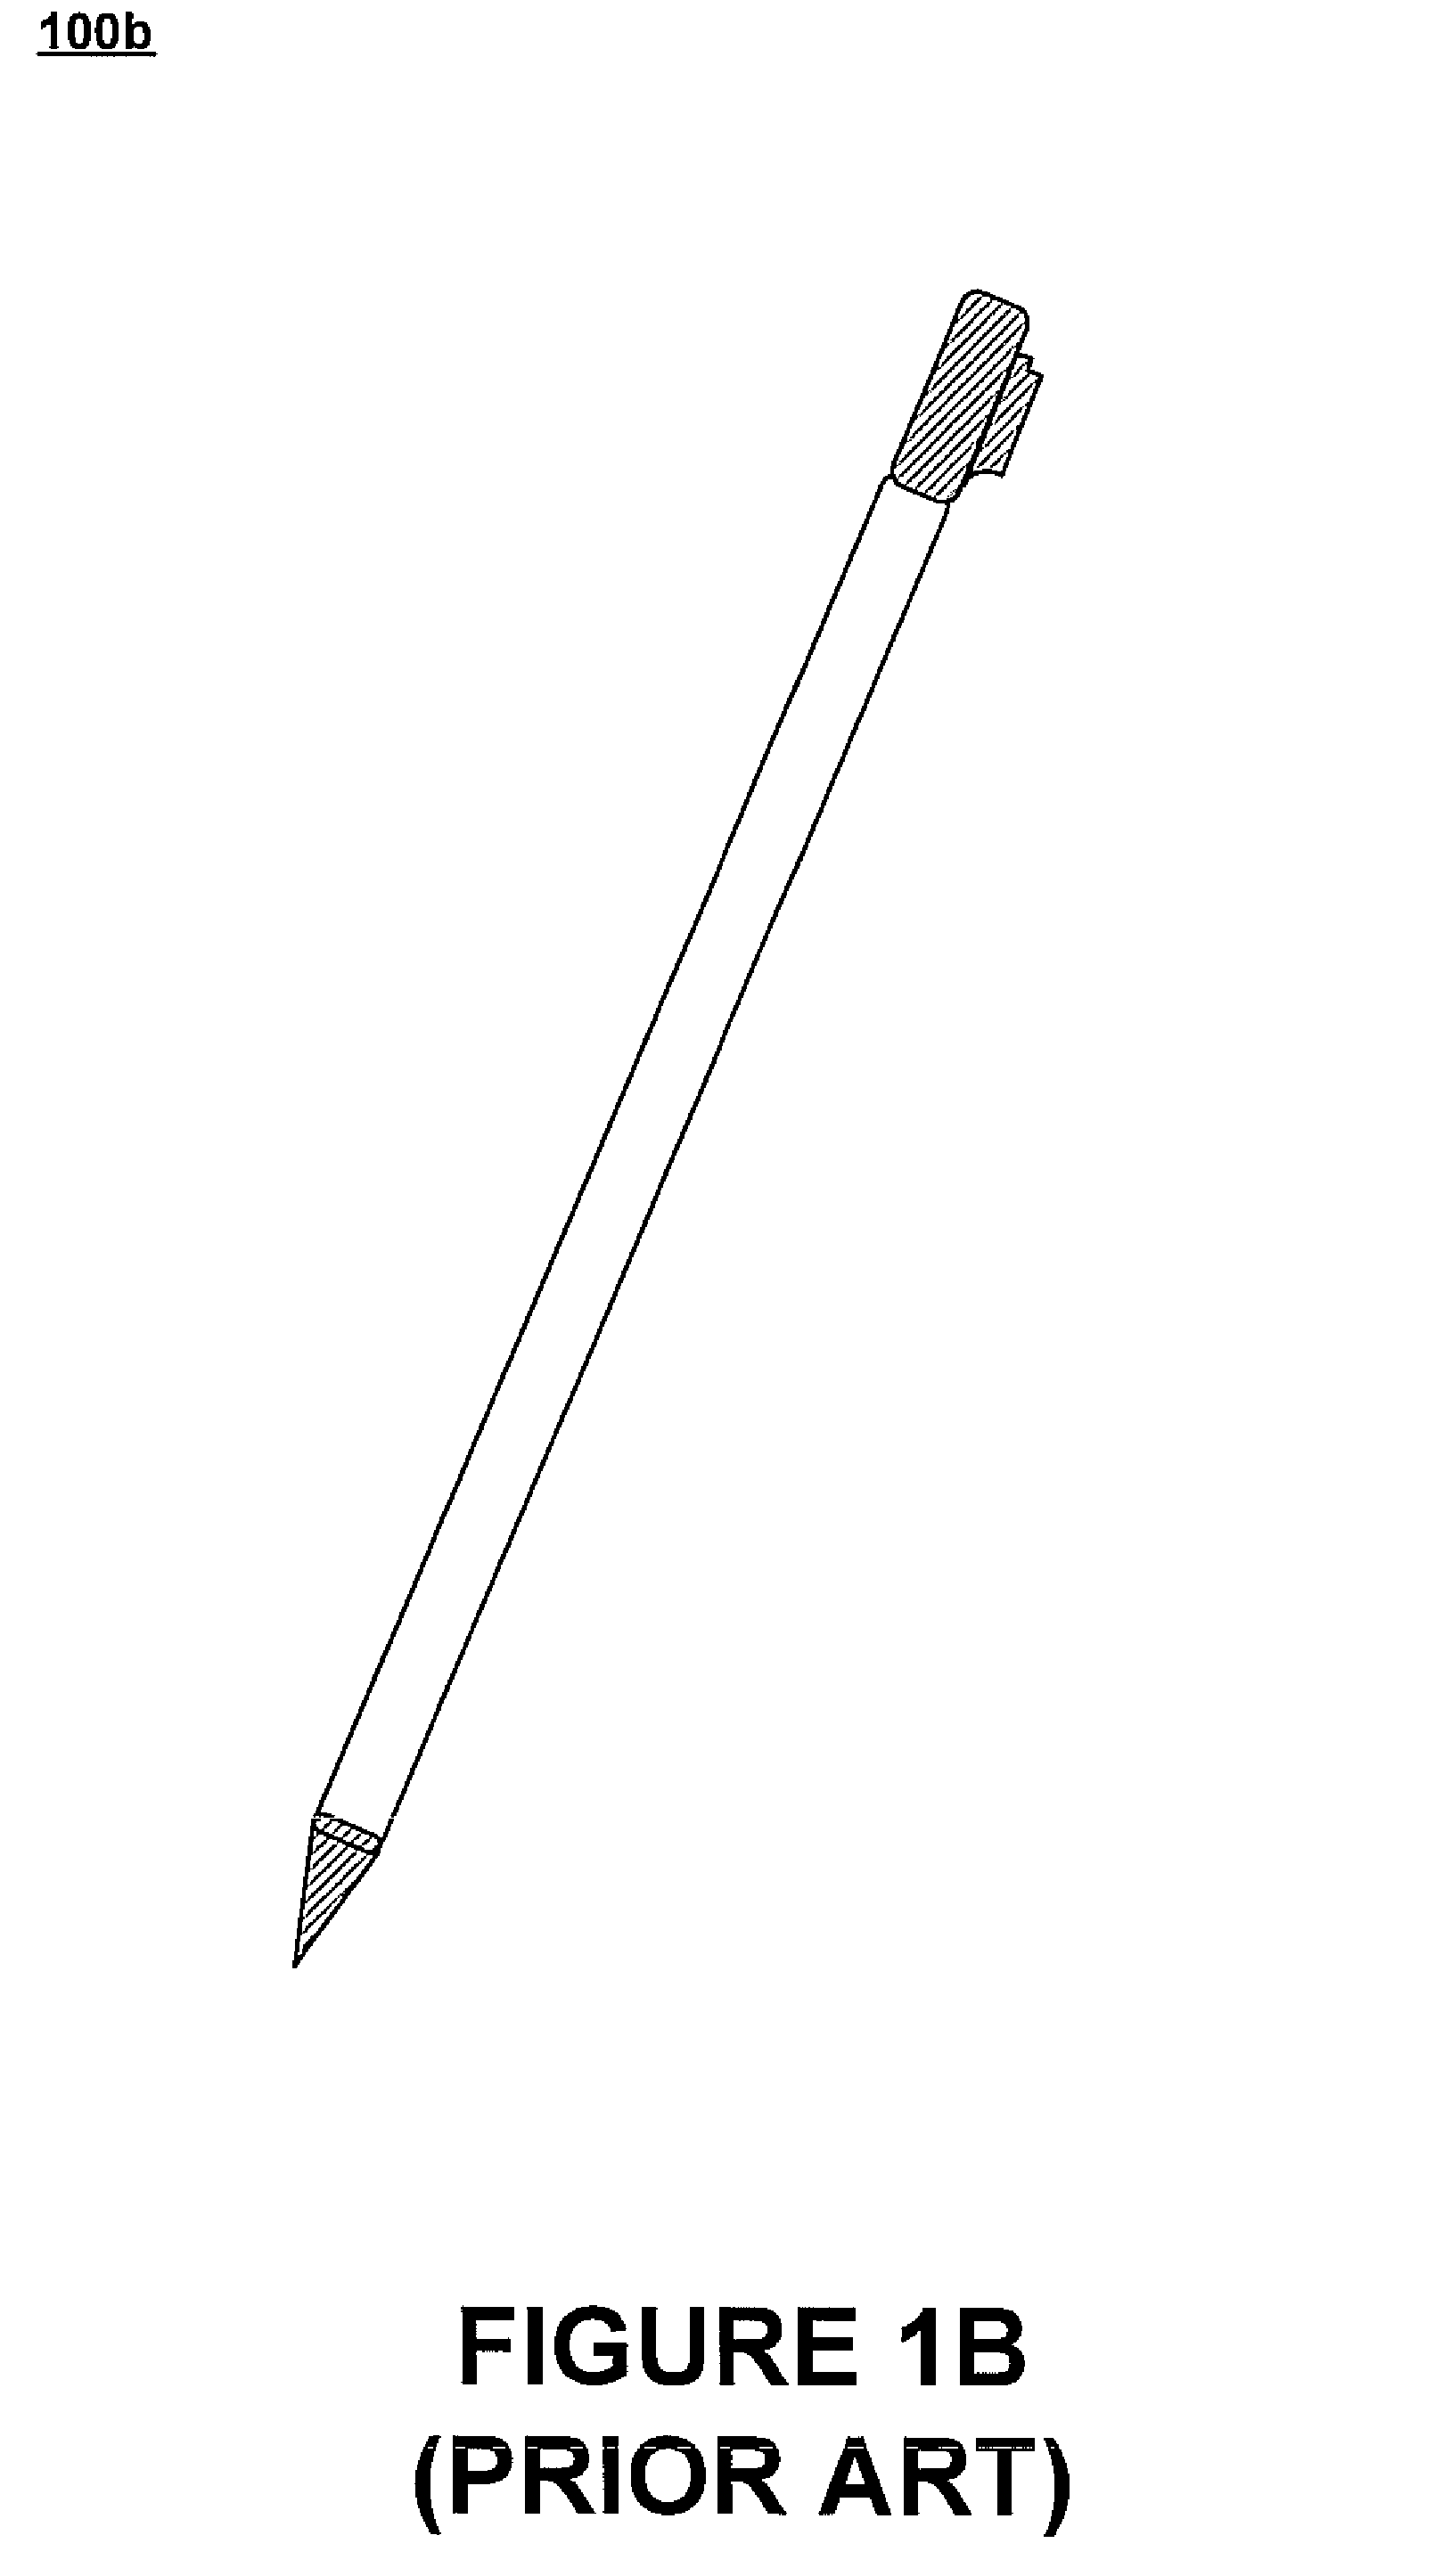 Expandable and contractible stylus